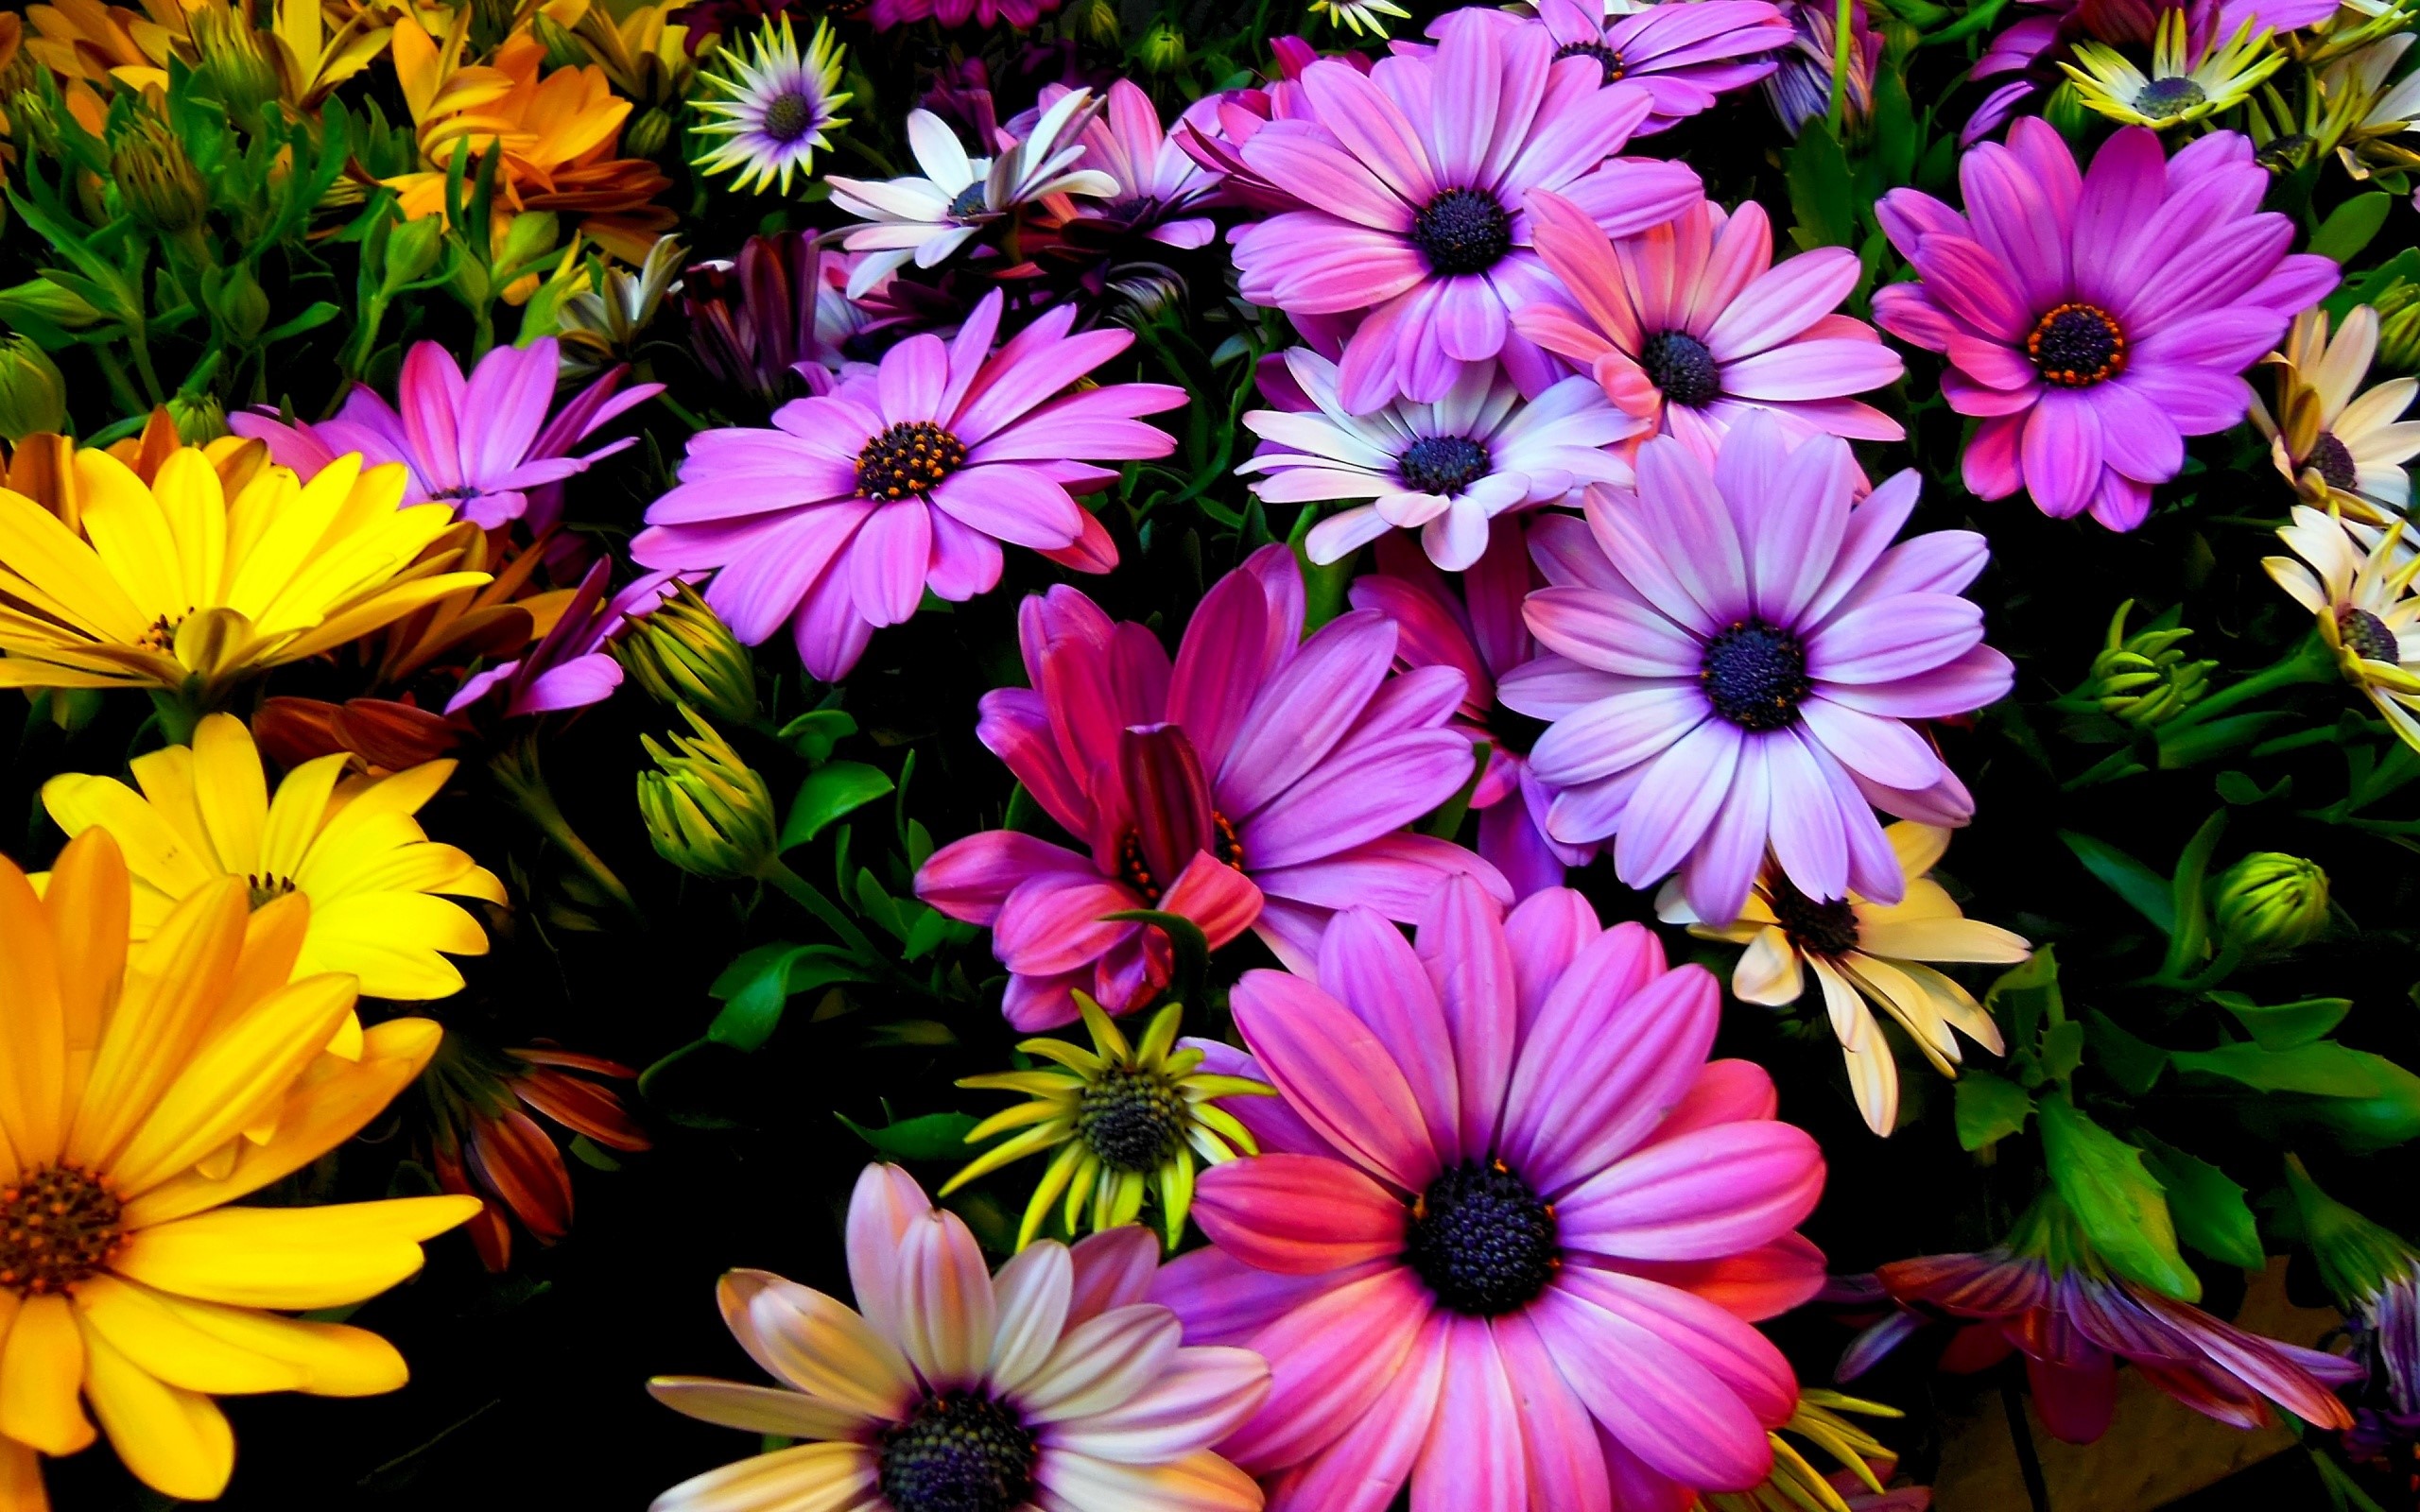 Yellow and purple daisies Wallpaper 2k Quad HD